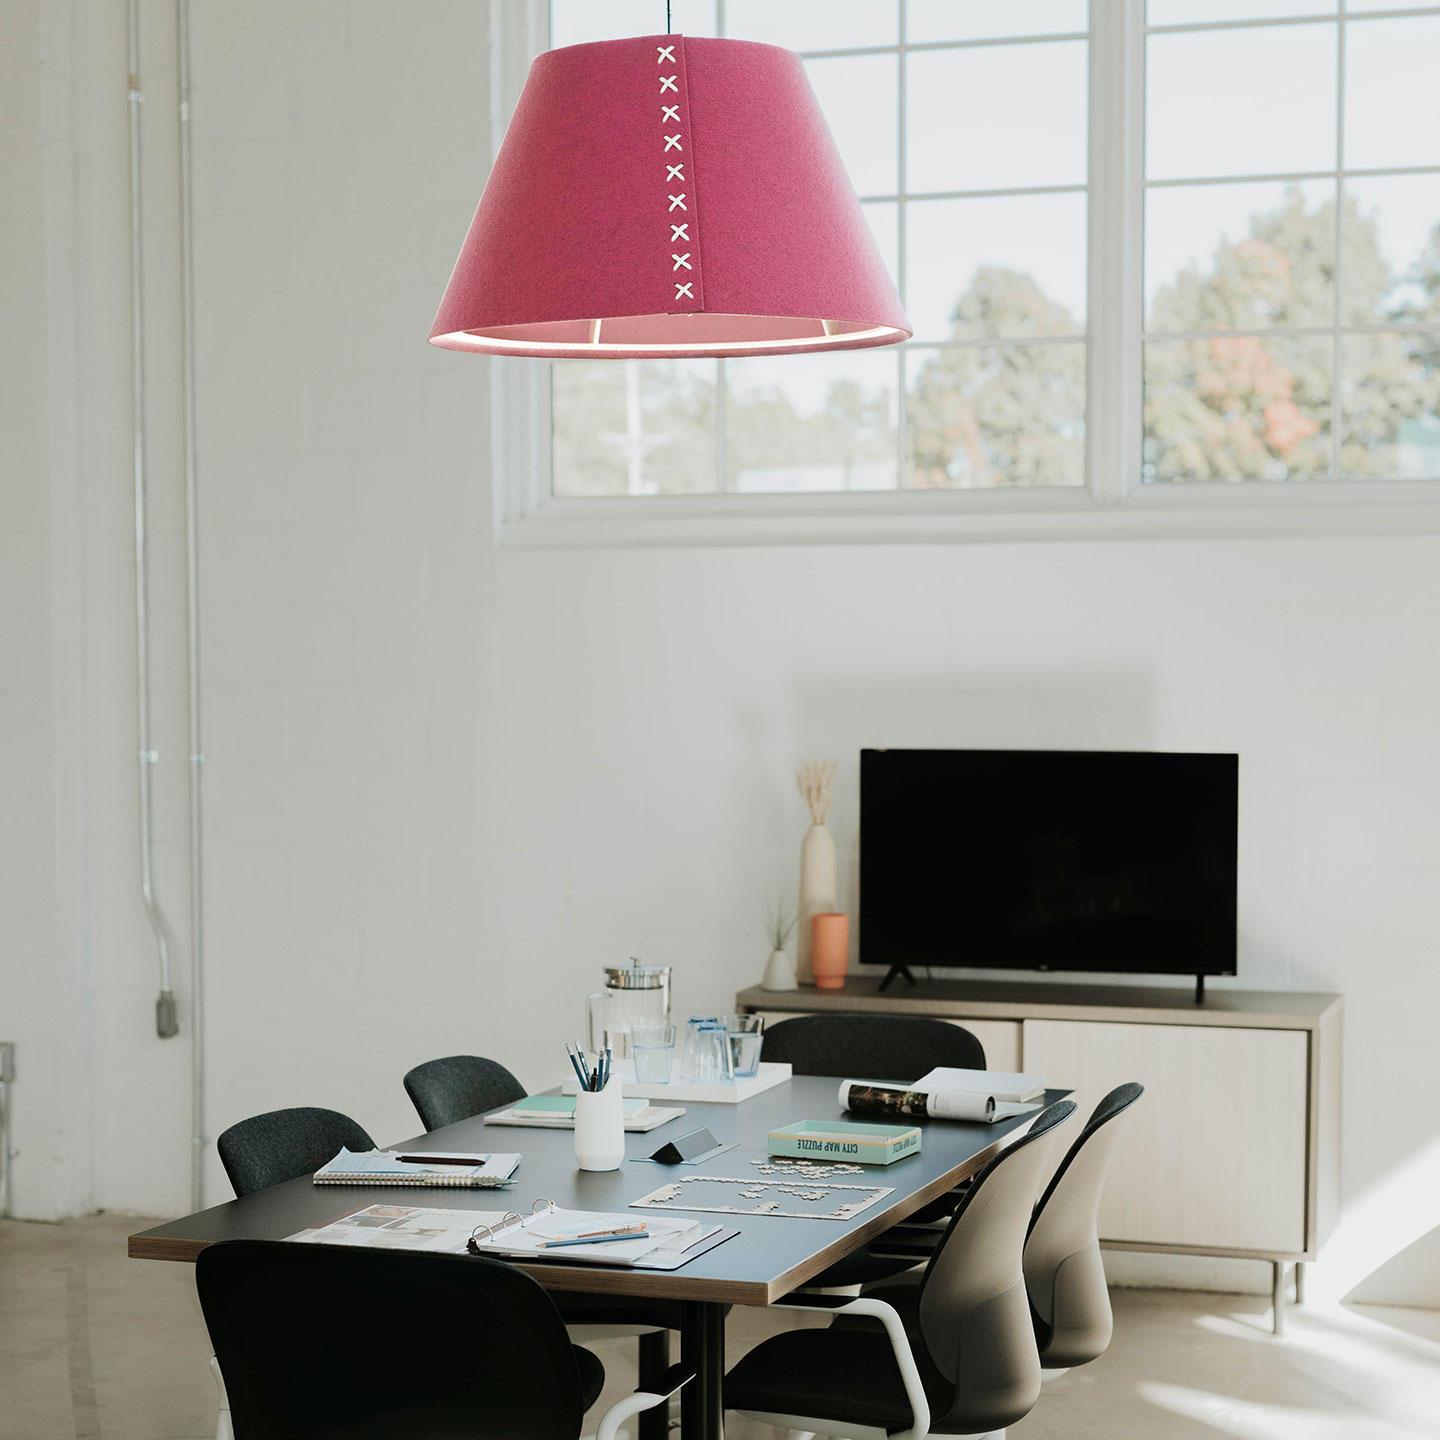 Haworth BuzziShade lighting in pink above small black table with black chairs in private meeting room